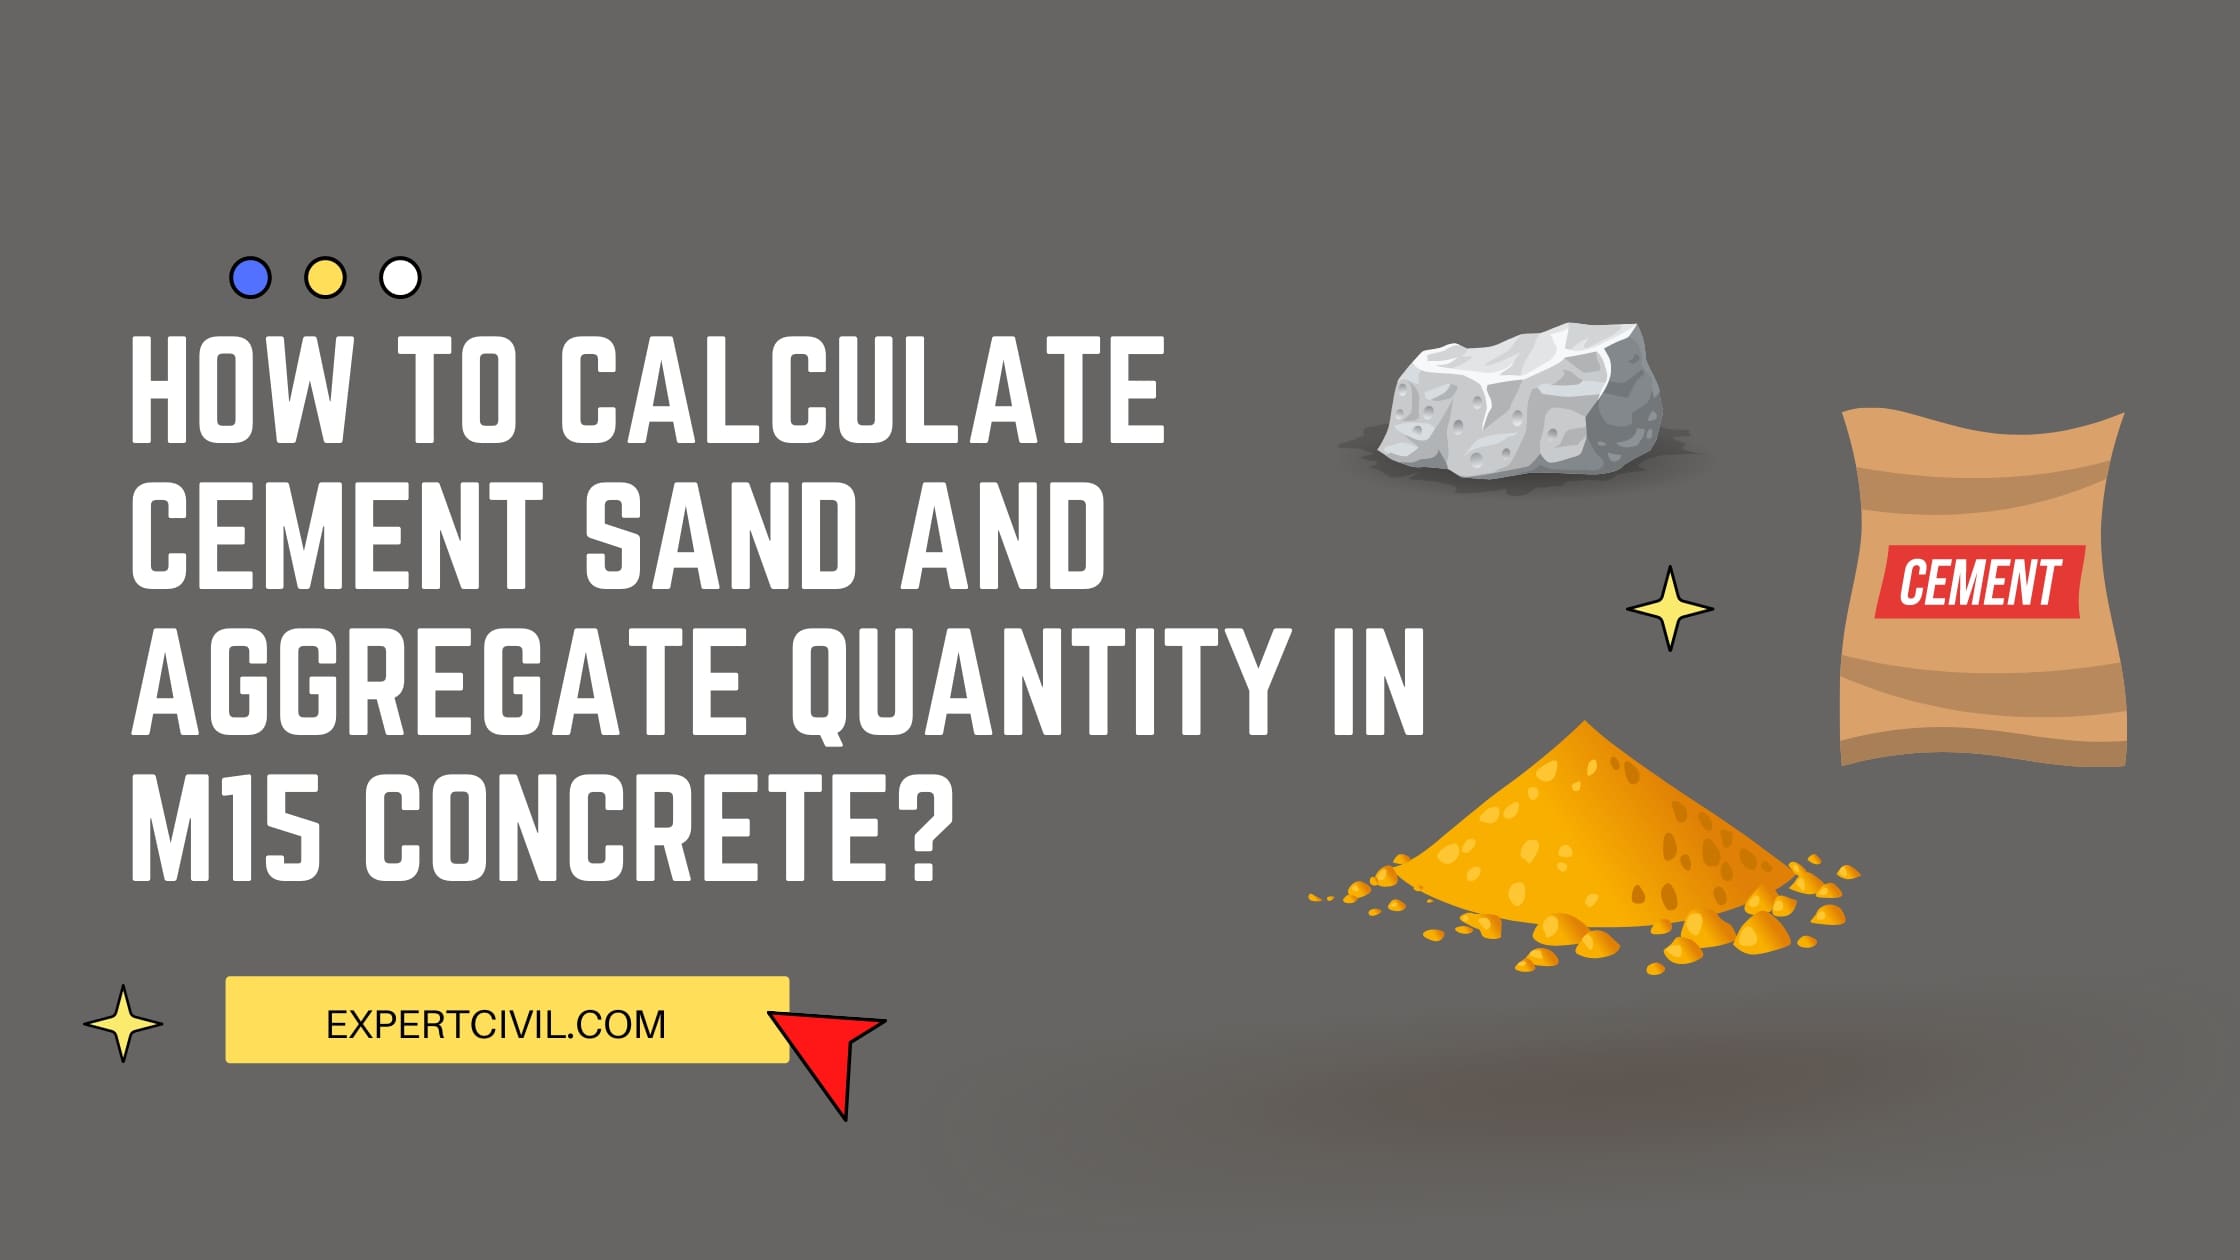 How to calculate cement sand and aggregate quantity in m15 concrete?